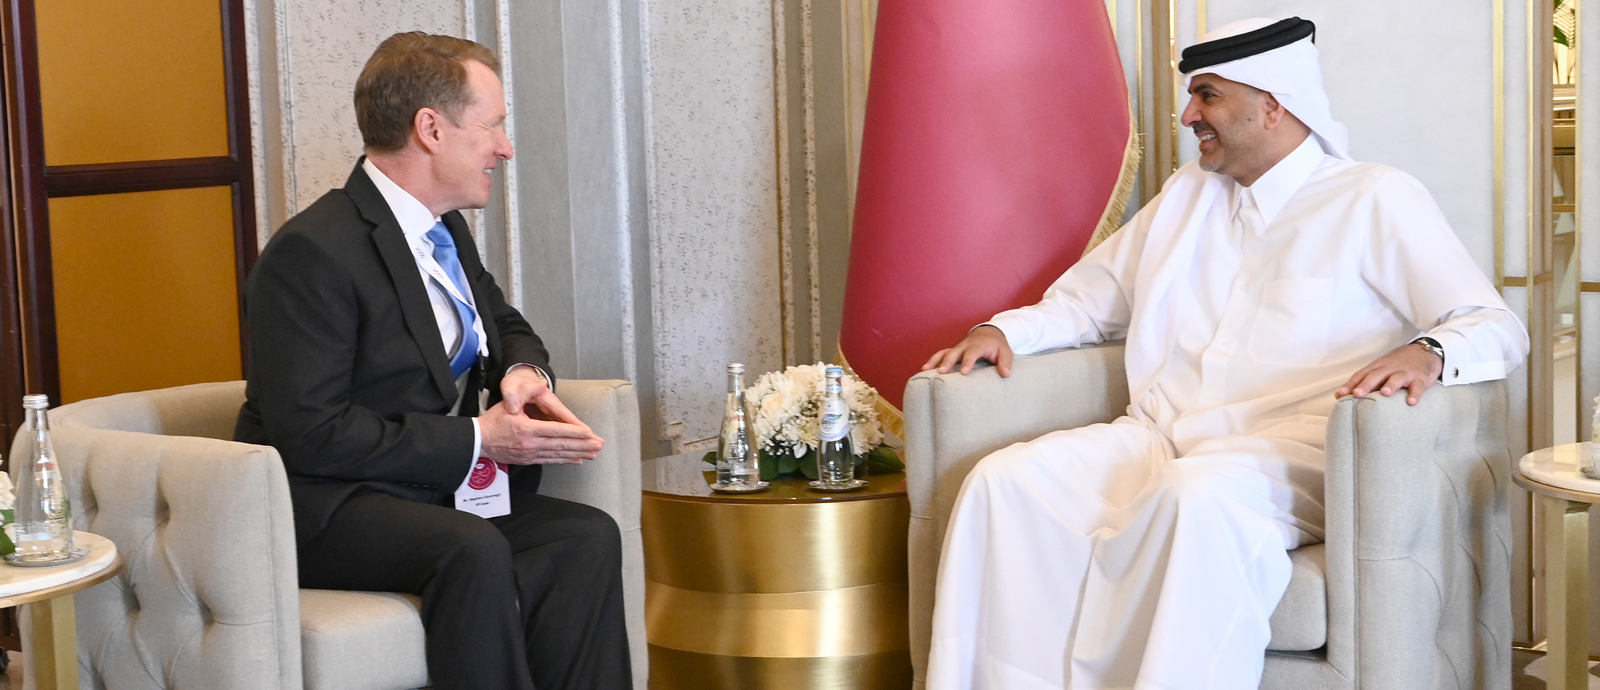 Prime Minister meets Executive Director of Police Services at INTERPOL